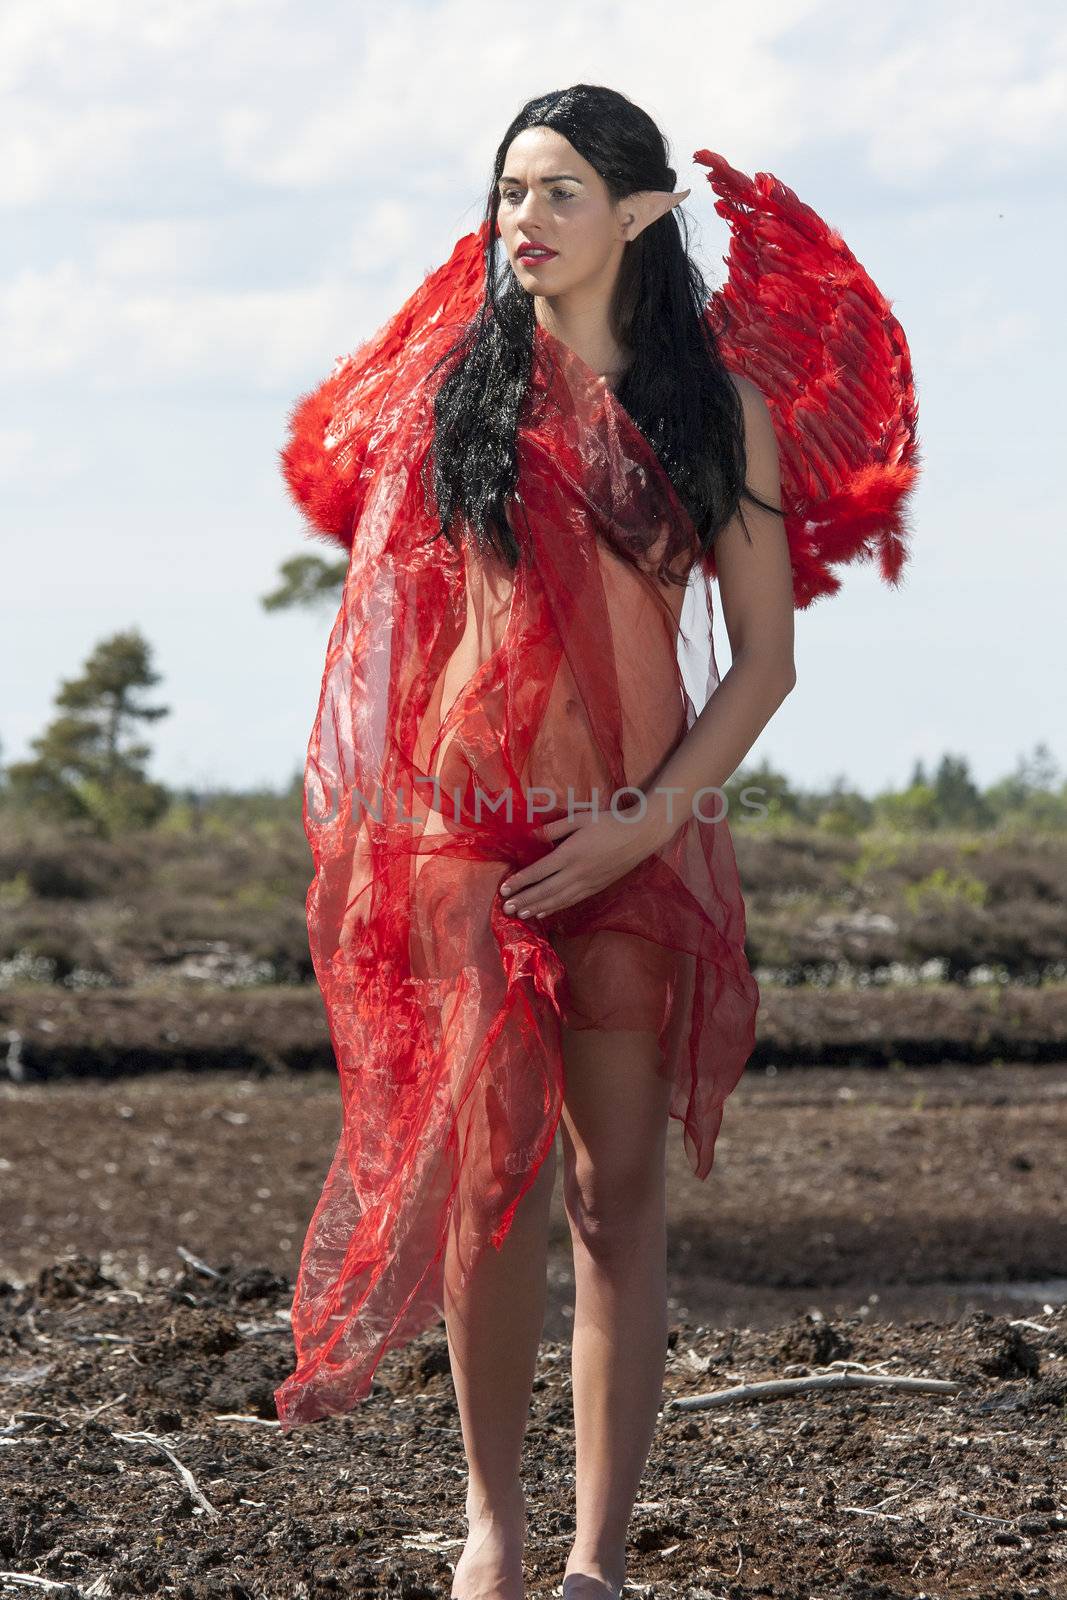 Elf with red wings and stands in the mud cloth